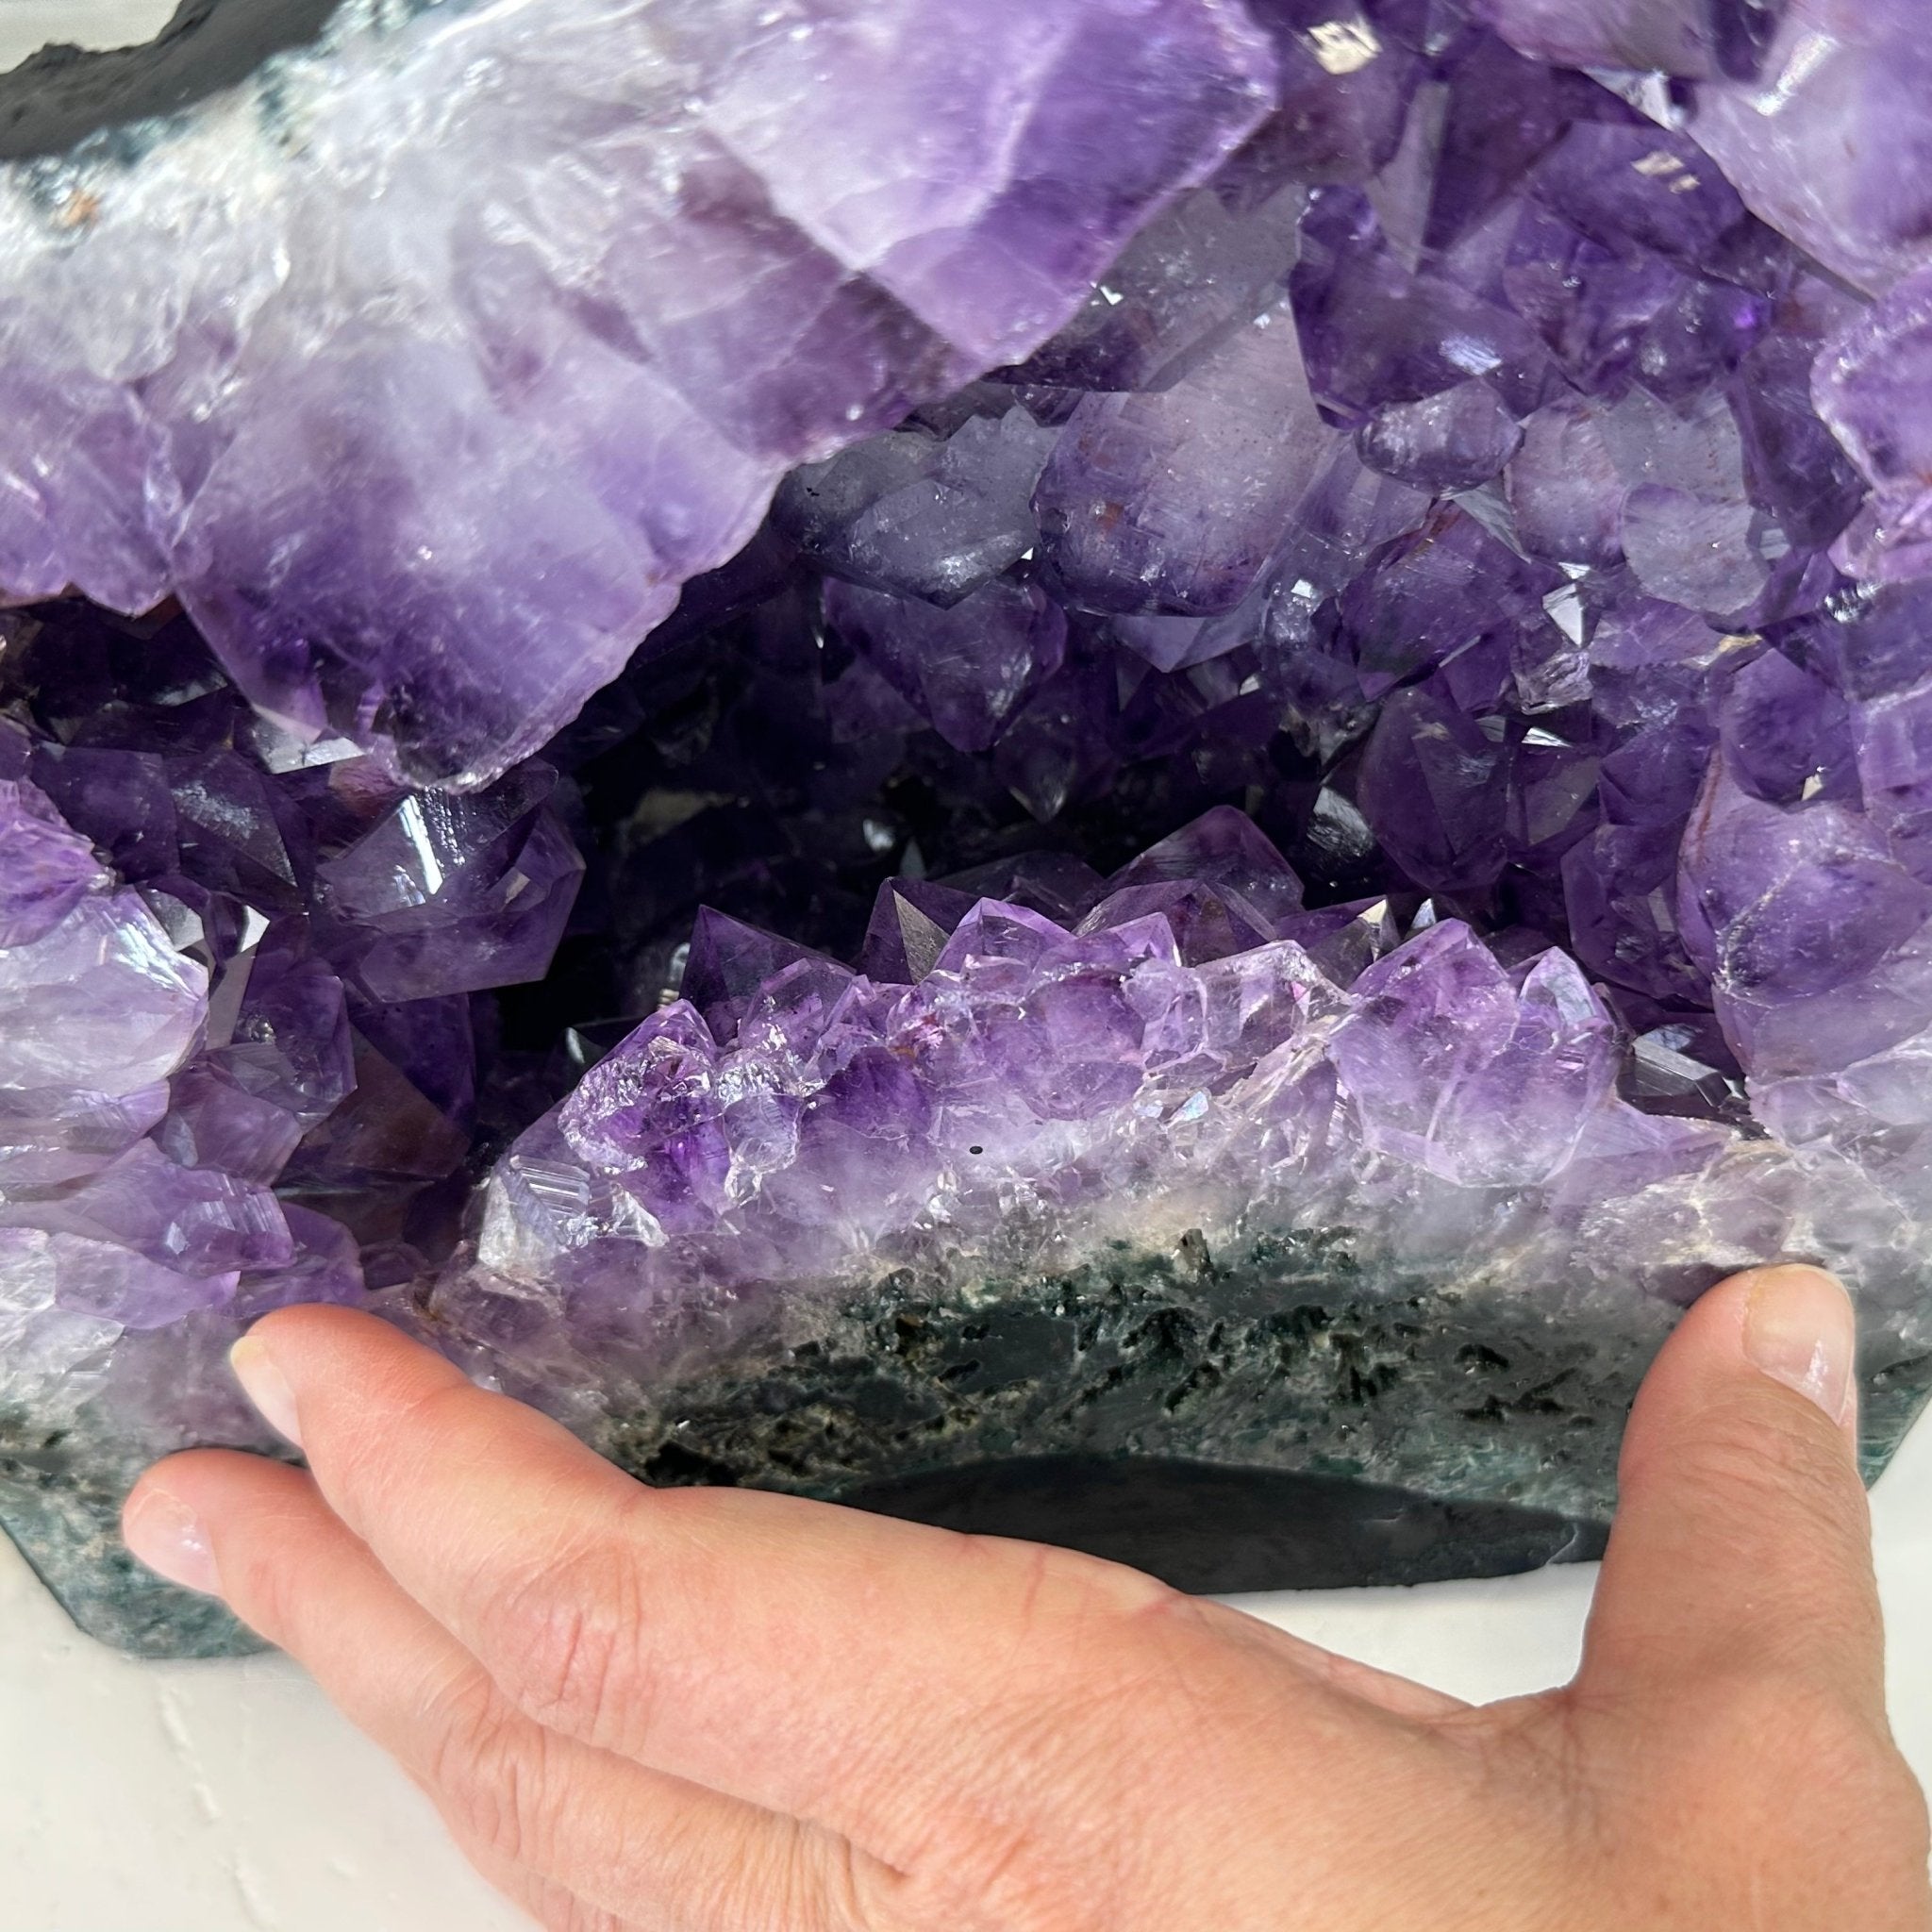 Extra Plus Quality Brazilian Amethyst Cathedral, 19.3 lbs & 11.8" Tall, Model #5601-1075 by Brazil Gems - Brazil GemsBrazil GemsExtra Plus Quality Brazilian Amethyst Cathedral, 19.3 lbs & 11.8" Tall, Model #5601-1075 by Brazil GemsCathedrals5601-1075